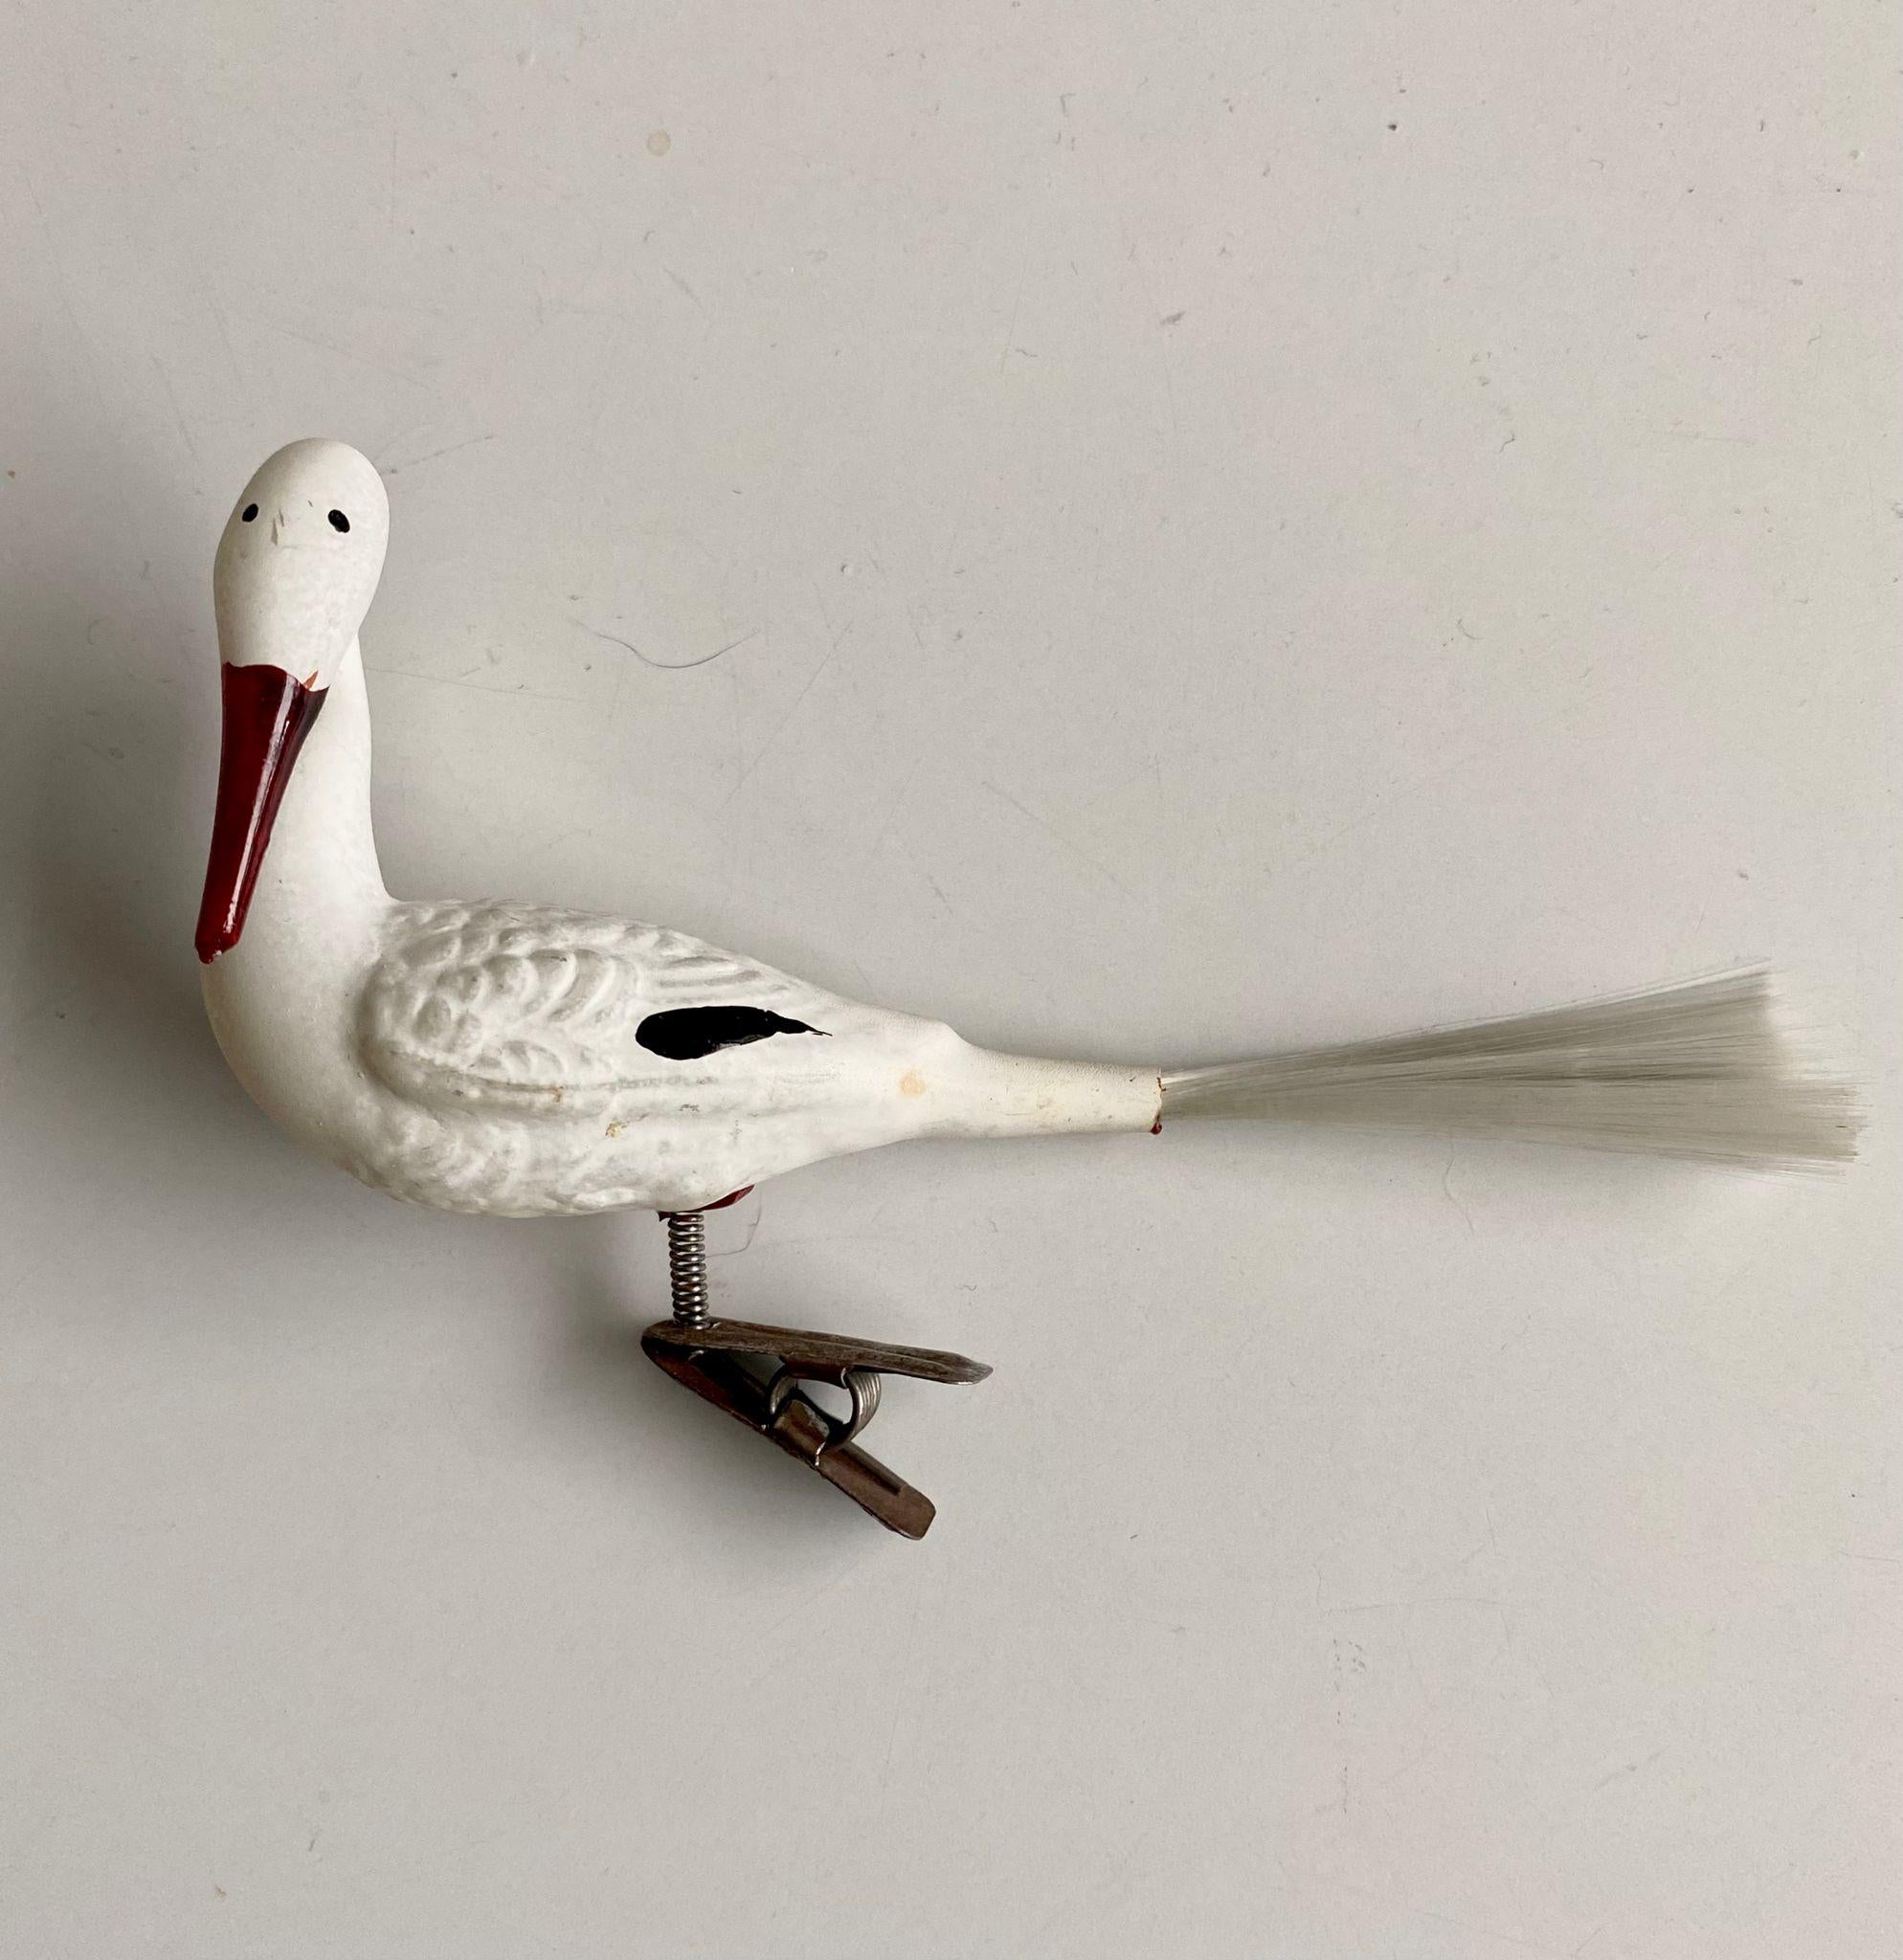 Rare vintage glass clip-on Christmas bird, Stork with large tail.
Beautifully decorated and in good condition with normal wear, consisting it's age. True Eye-catching piece!